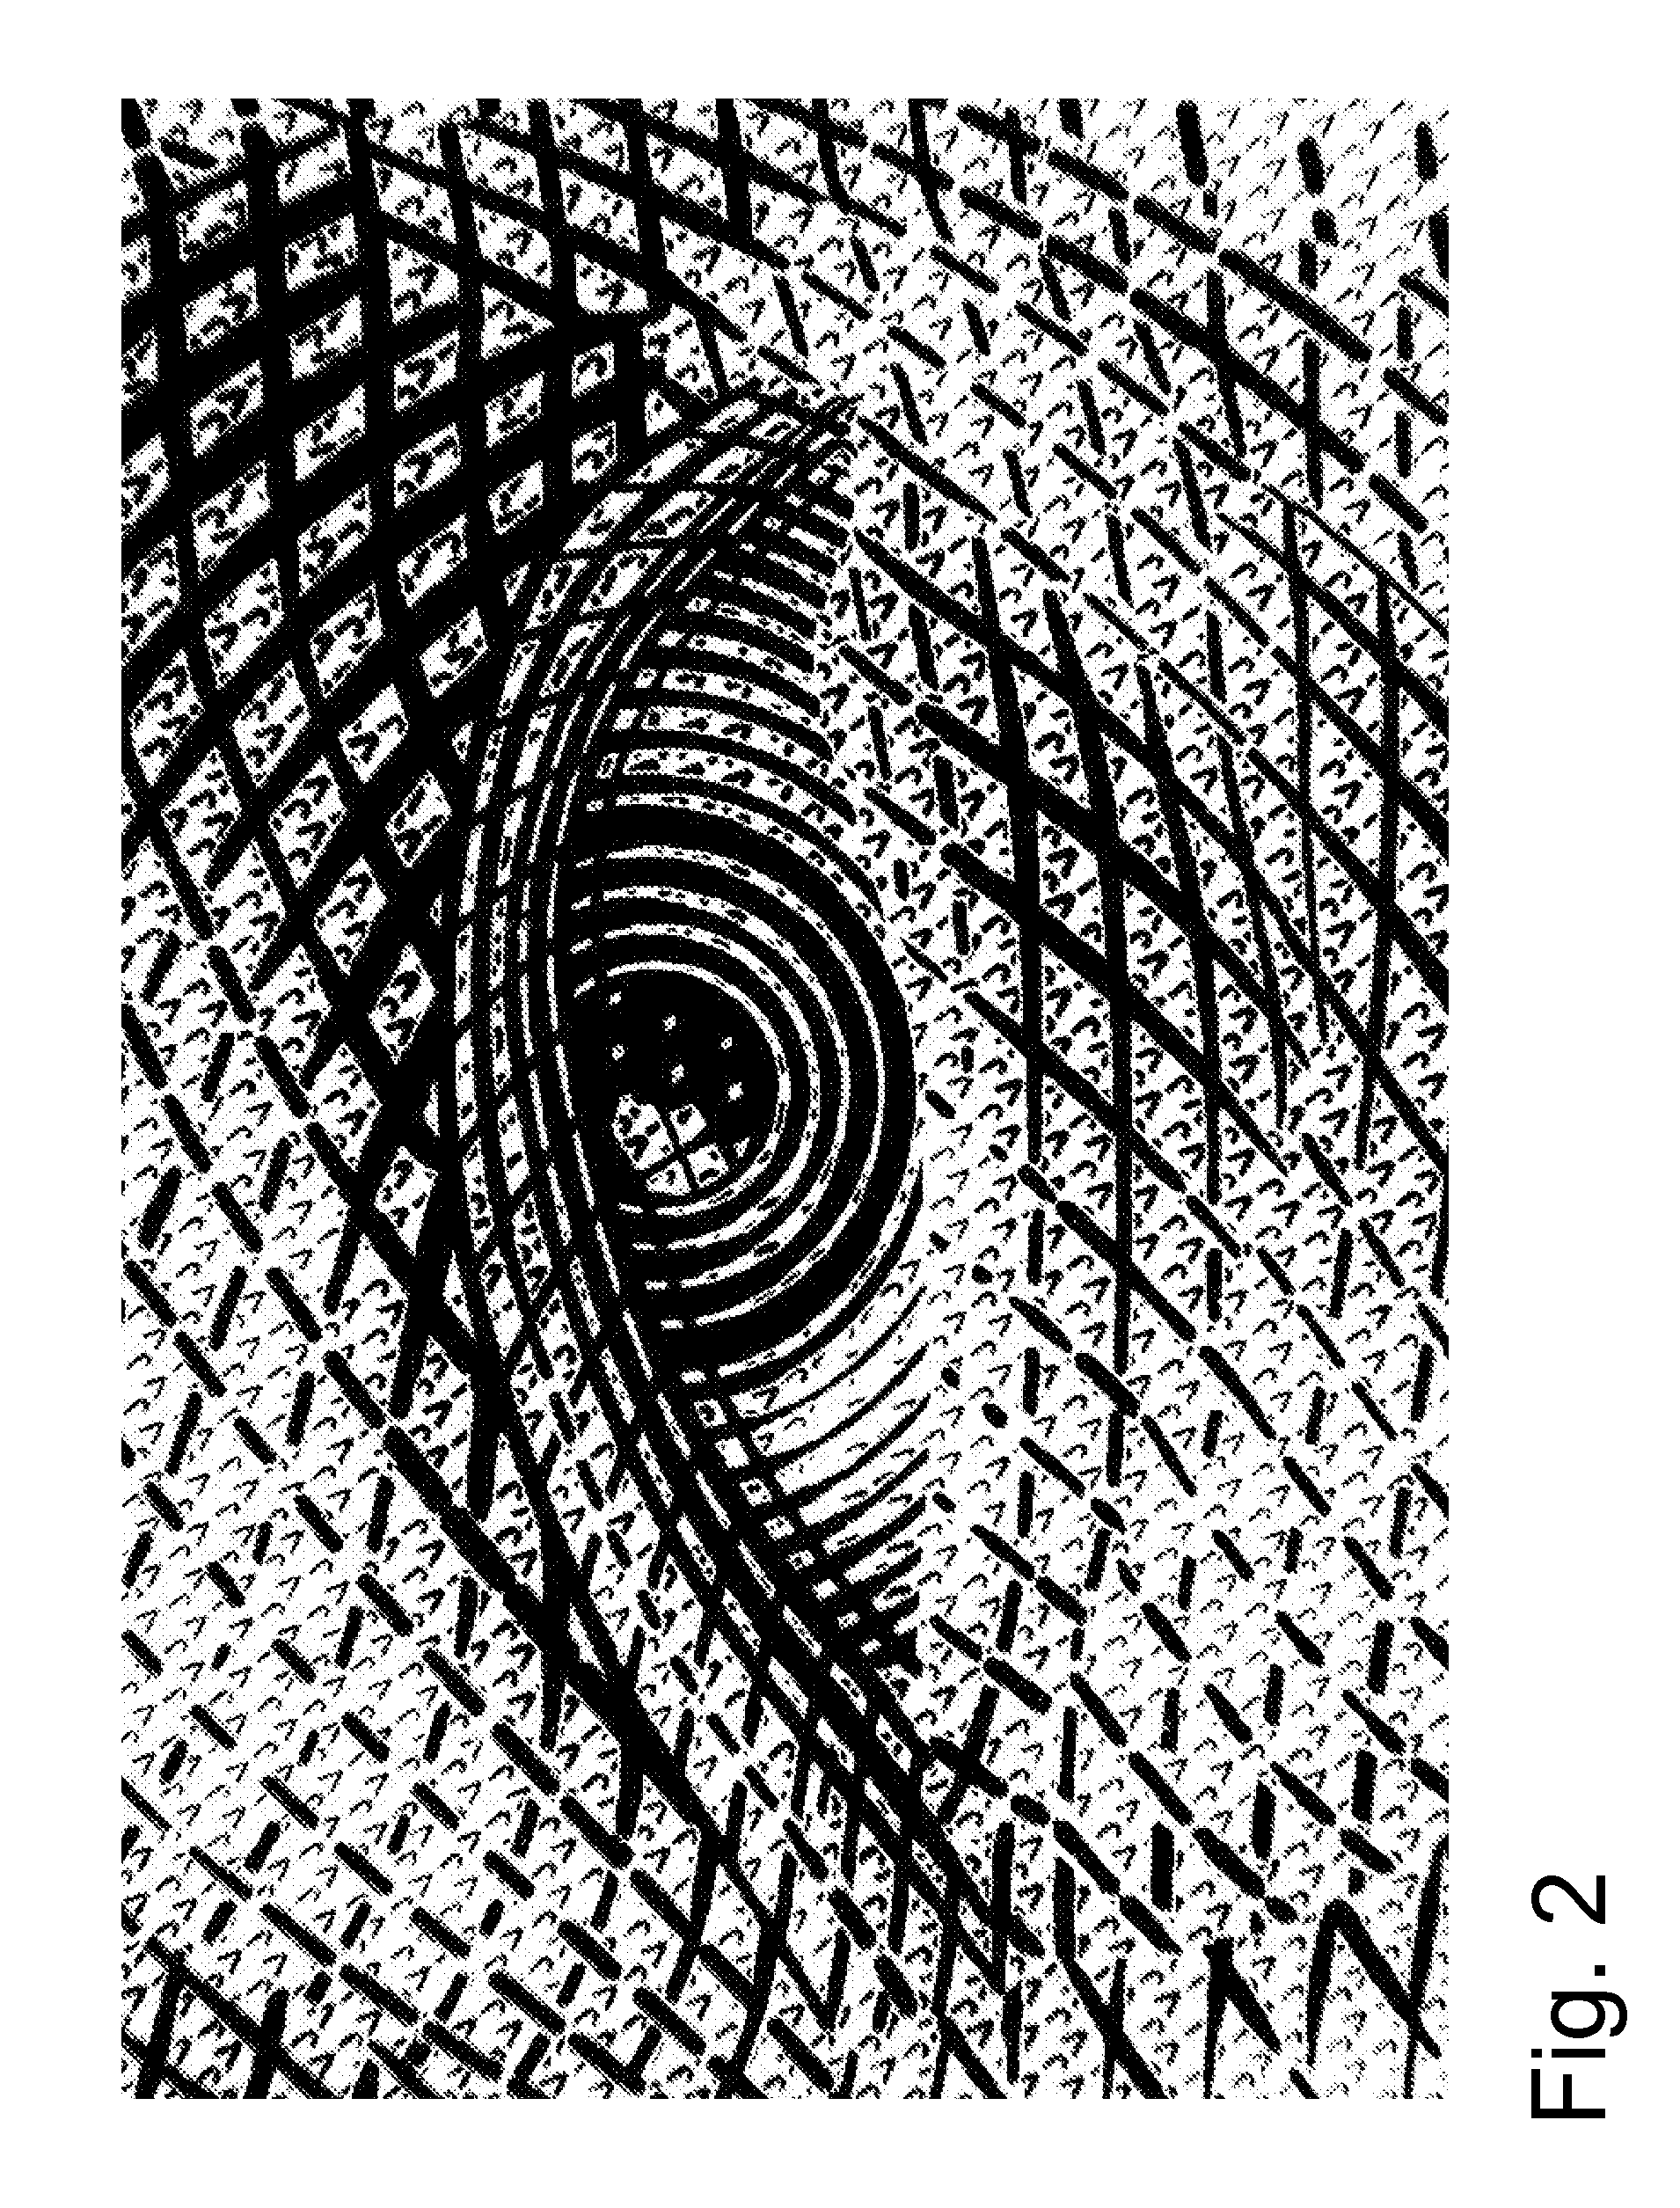 Method and System for Manufacturing Intaglio Printing Plates for the Production of Security Papers